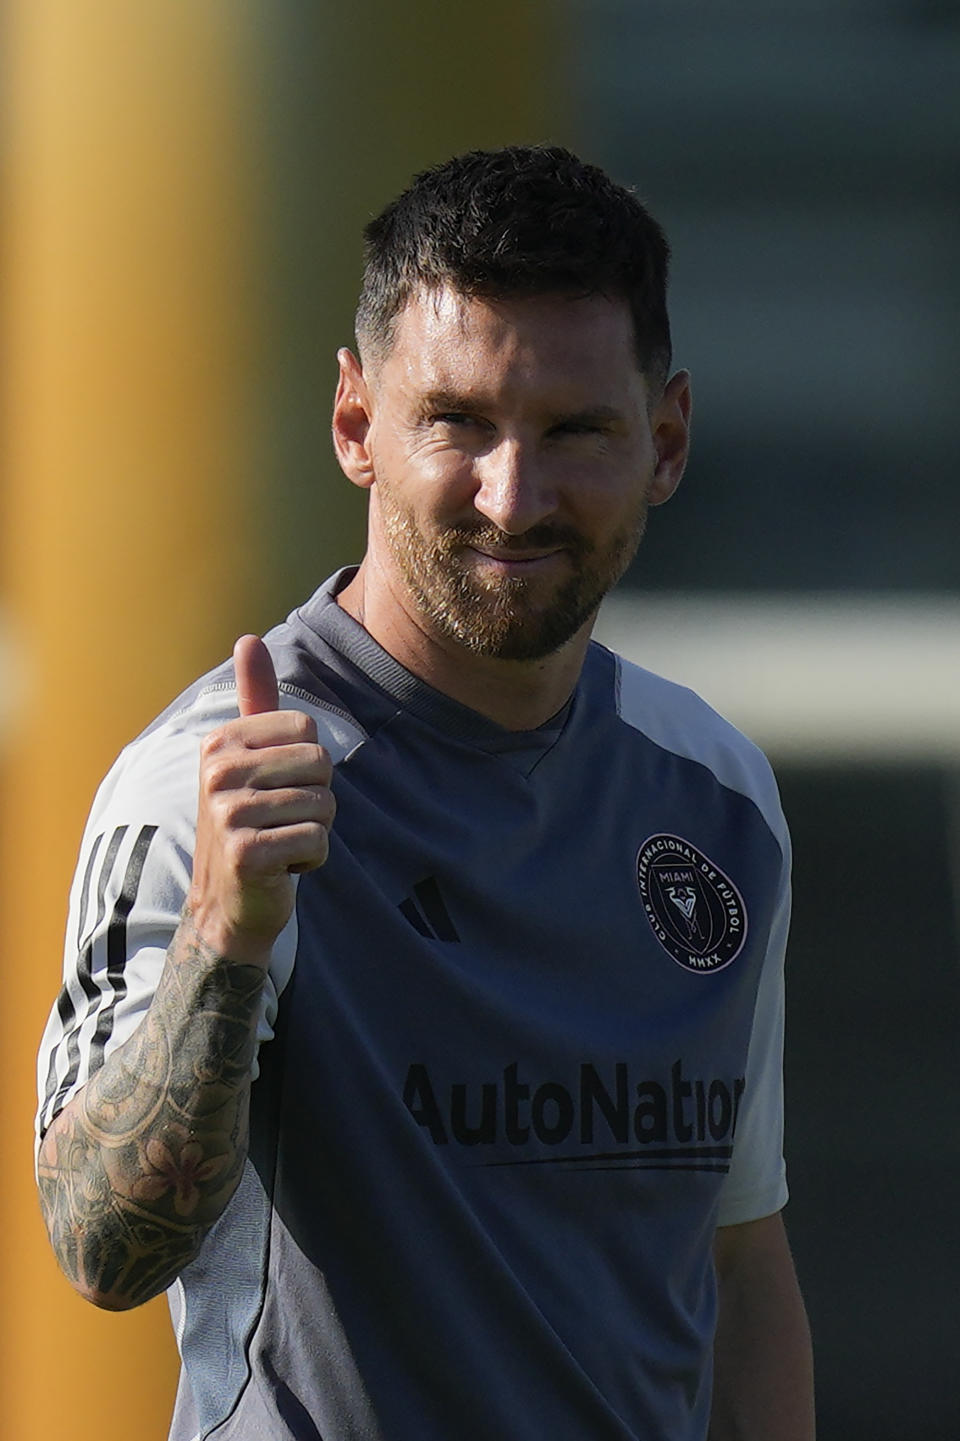 Lionel Messi gives a thumbs up toward journalists on the sideline as he participates in a training session for the Inter Miami MLS soccer team Tuesday, July 18, 2023, in Fort Lauderdale, Fla. (AP Photo/Rebecca Blackwell)